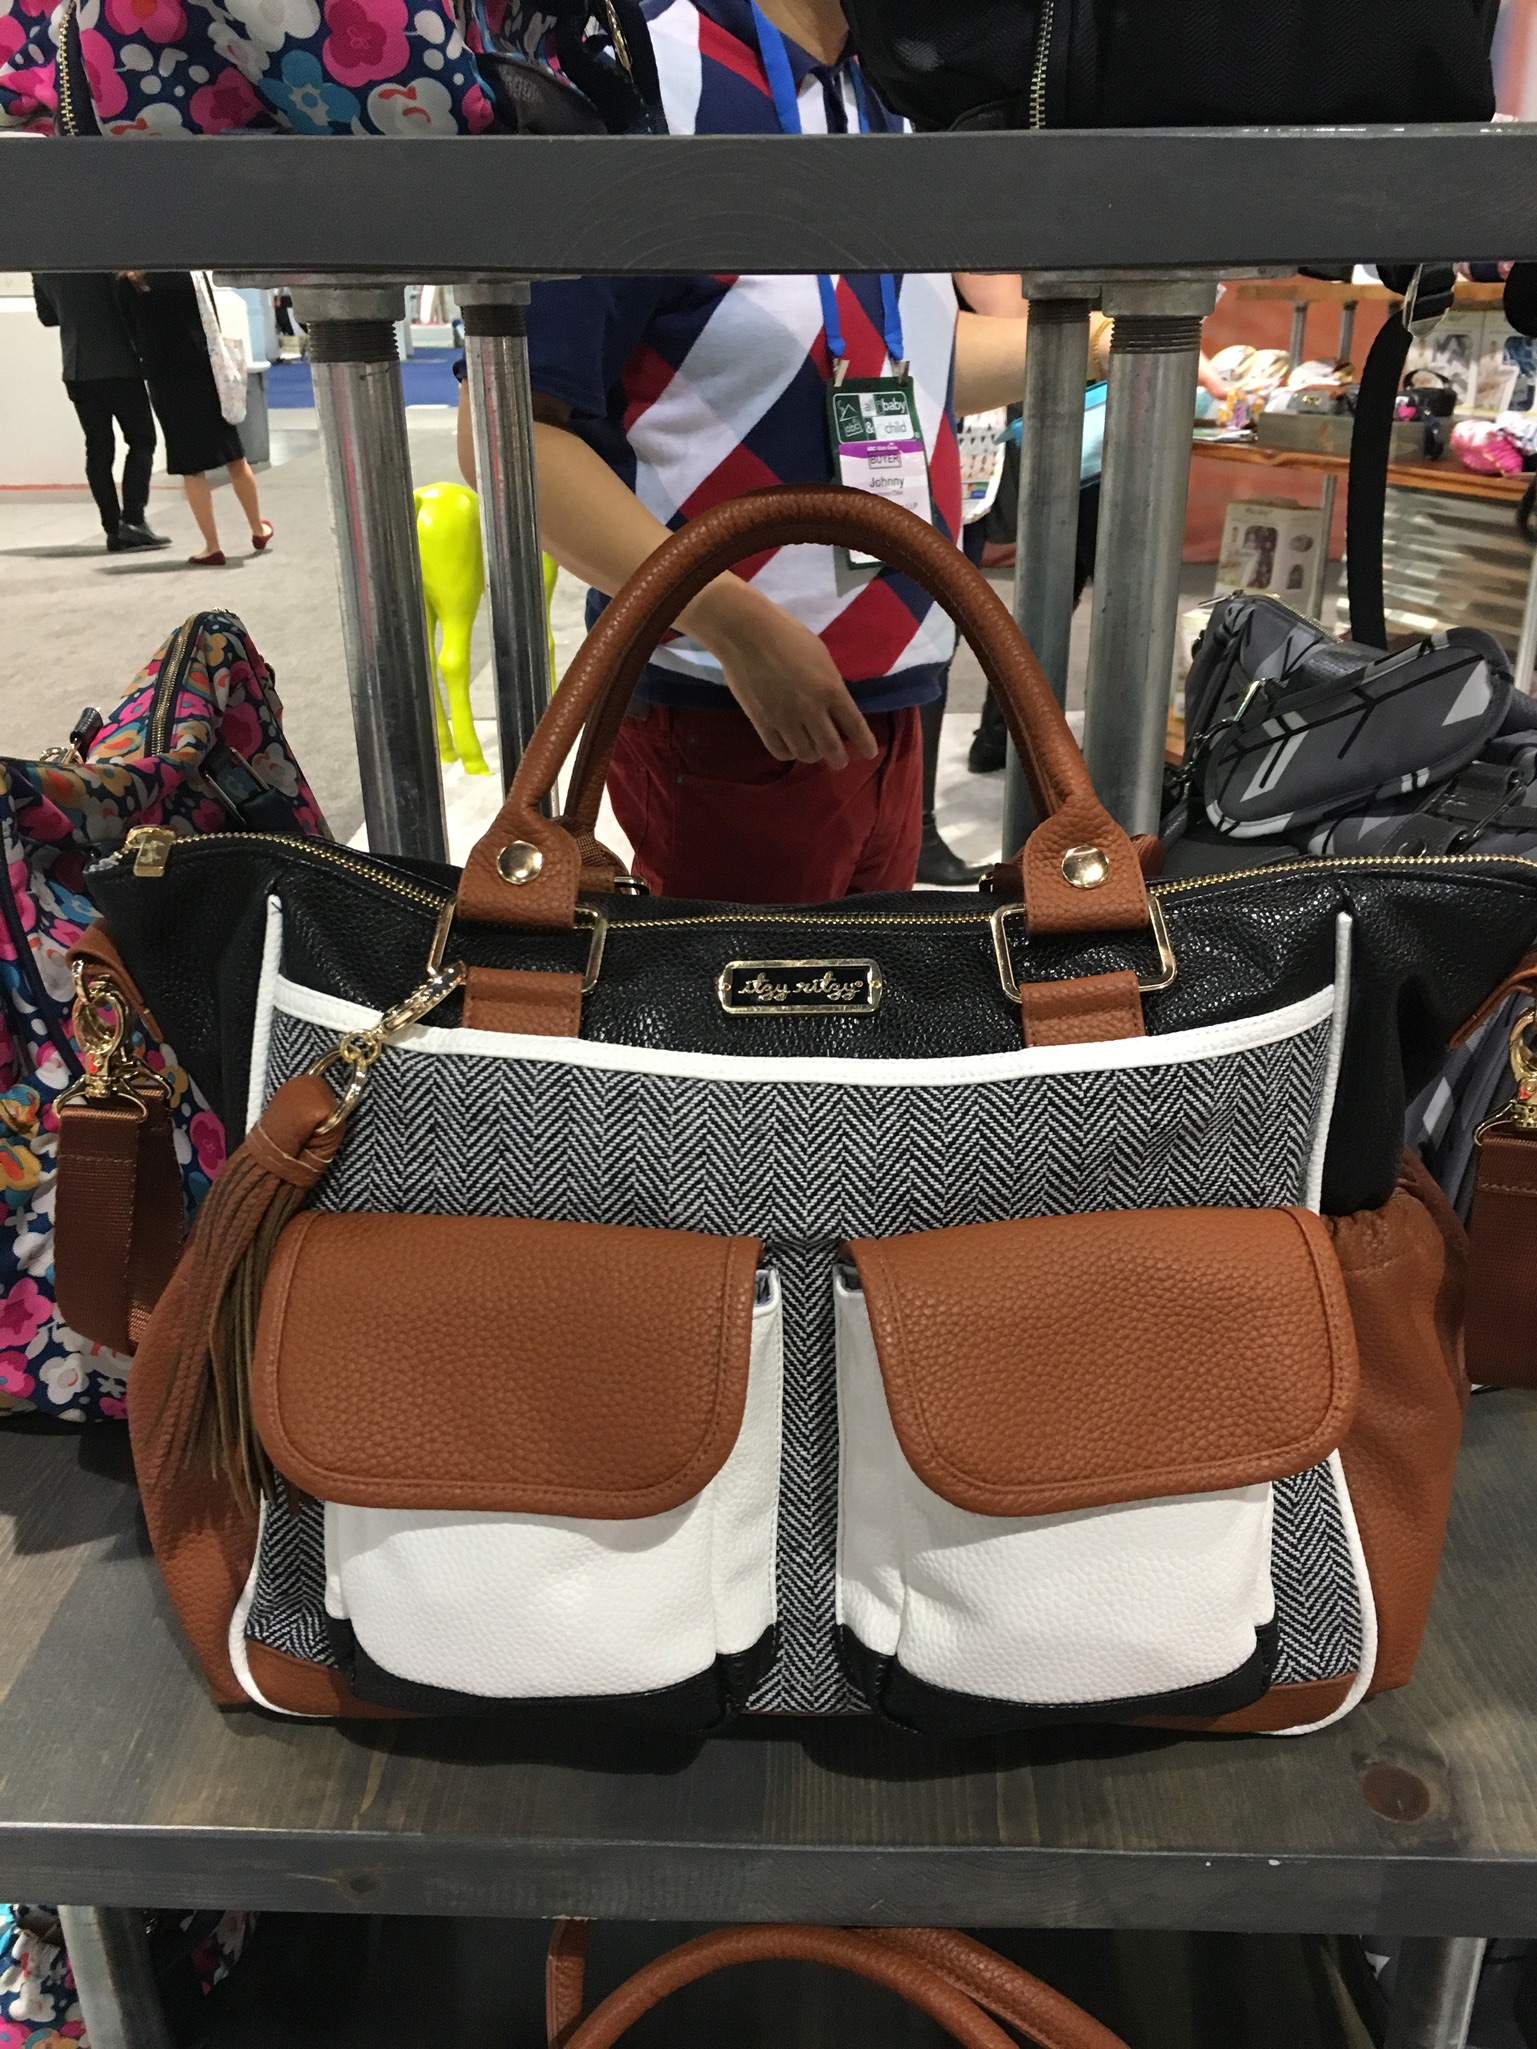 Triple Threat Diaper Bag in Coffee and Cream from Itzy Ritzy